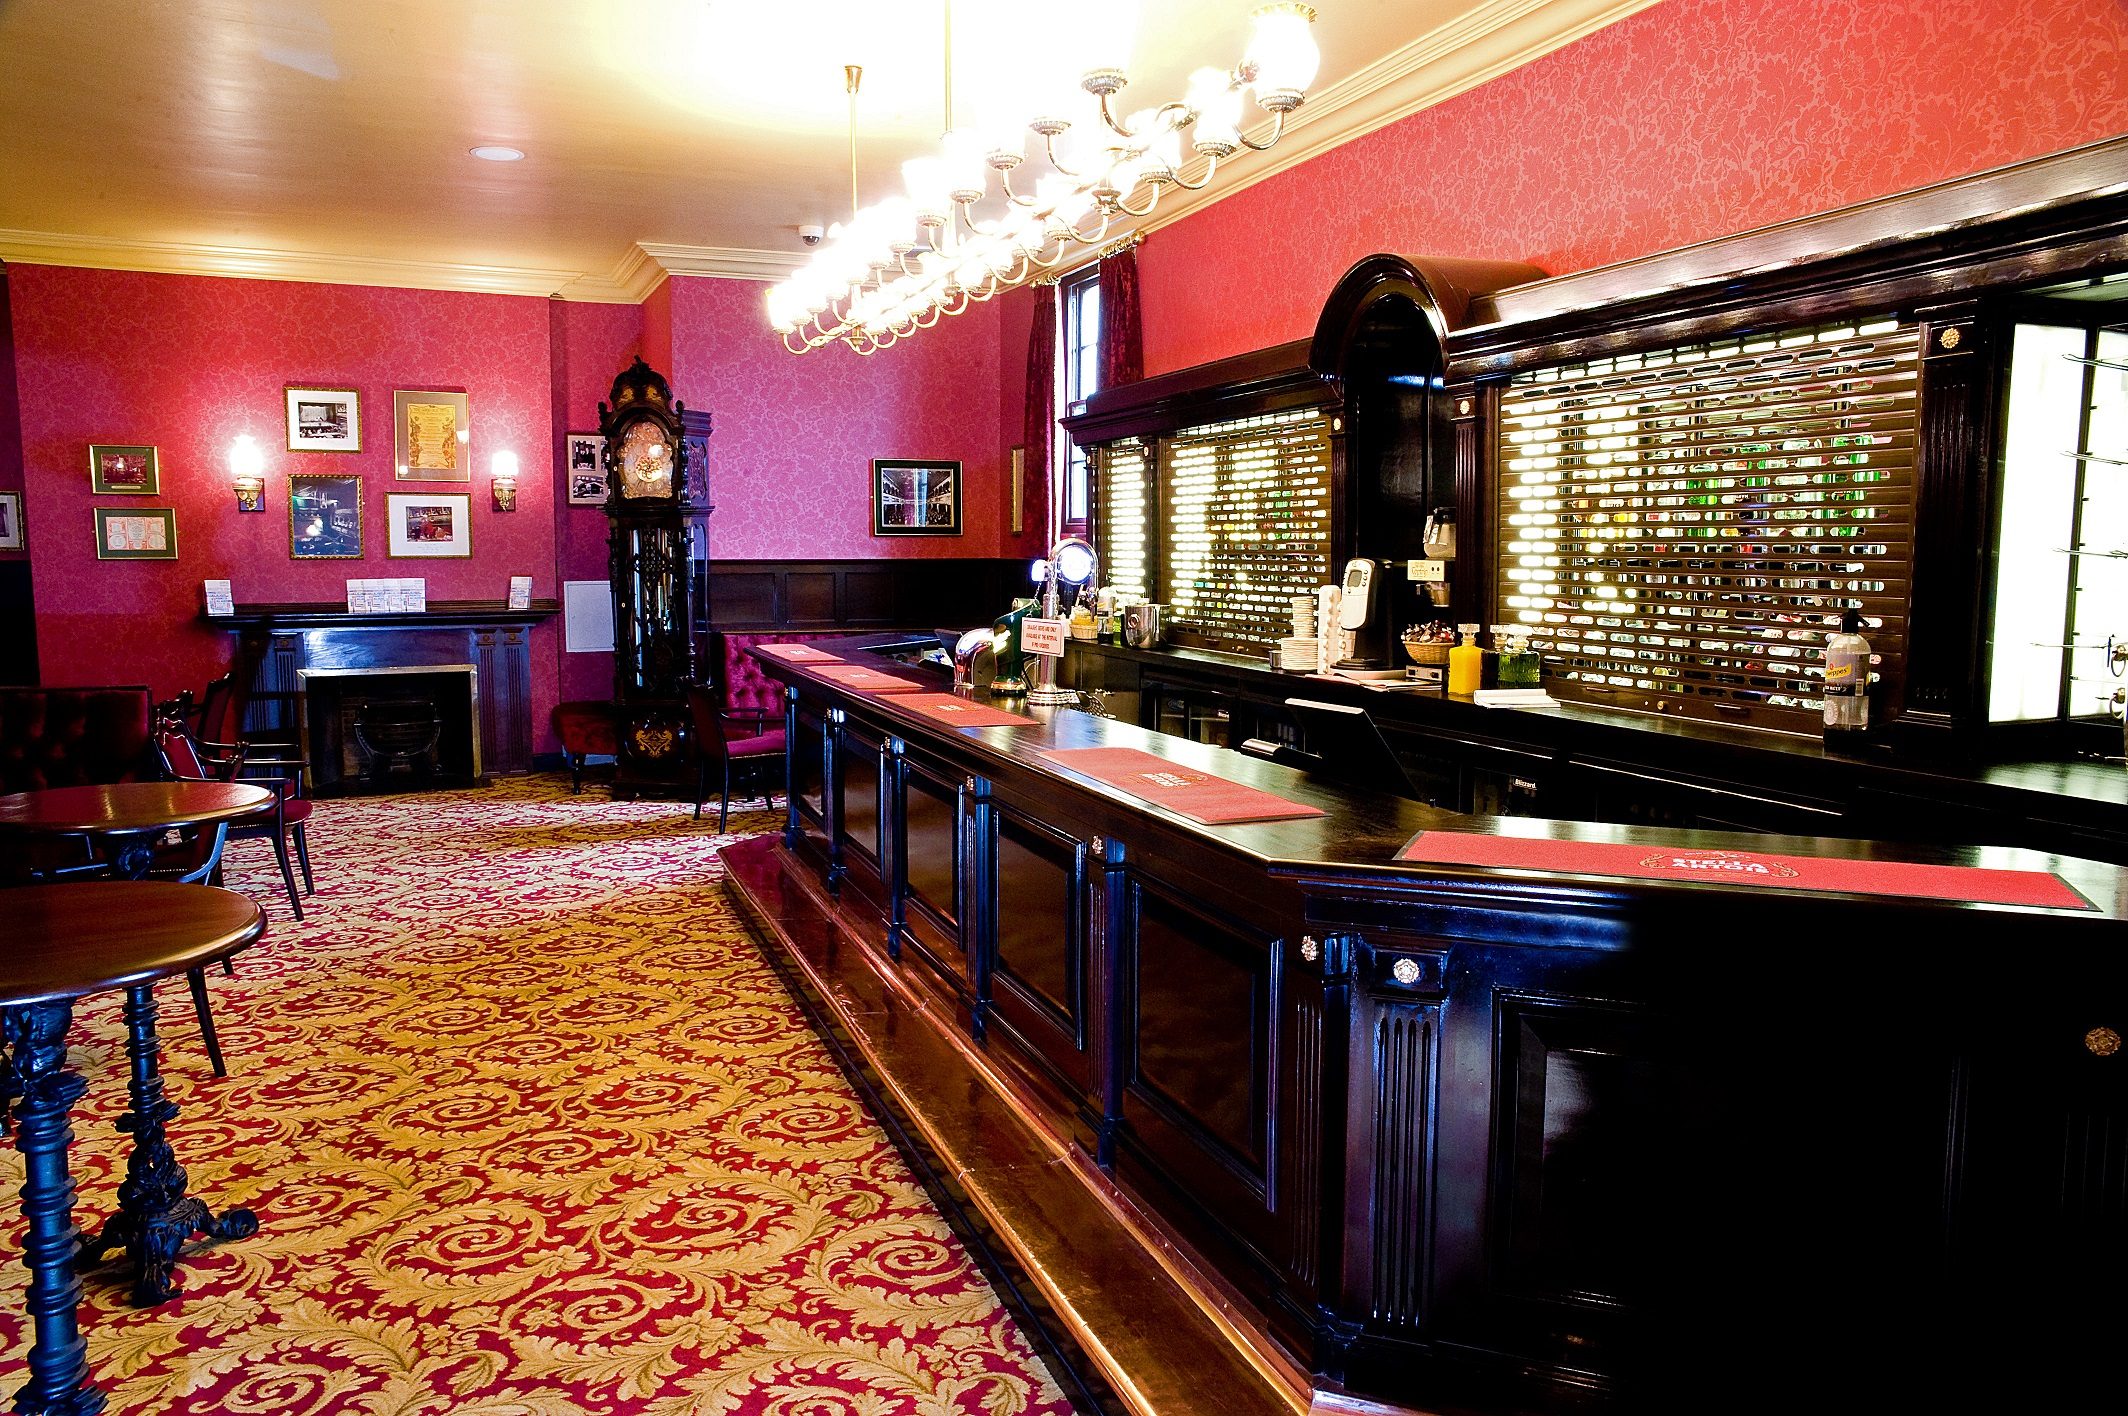 Inside of the City Varieties bar. There is a dark wood bar on the right hand side, an antique grandfather clock in the distance and dark wood round tables on the left. The carpet is red with a gold pattern and the walls are also red.